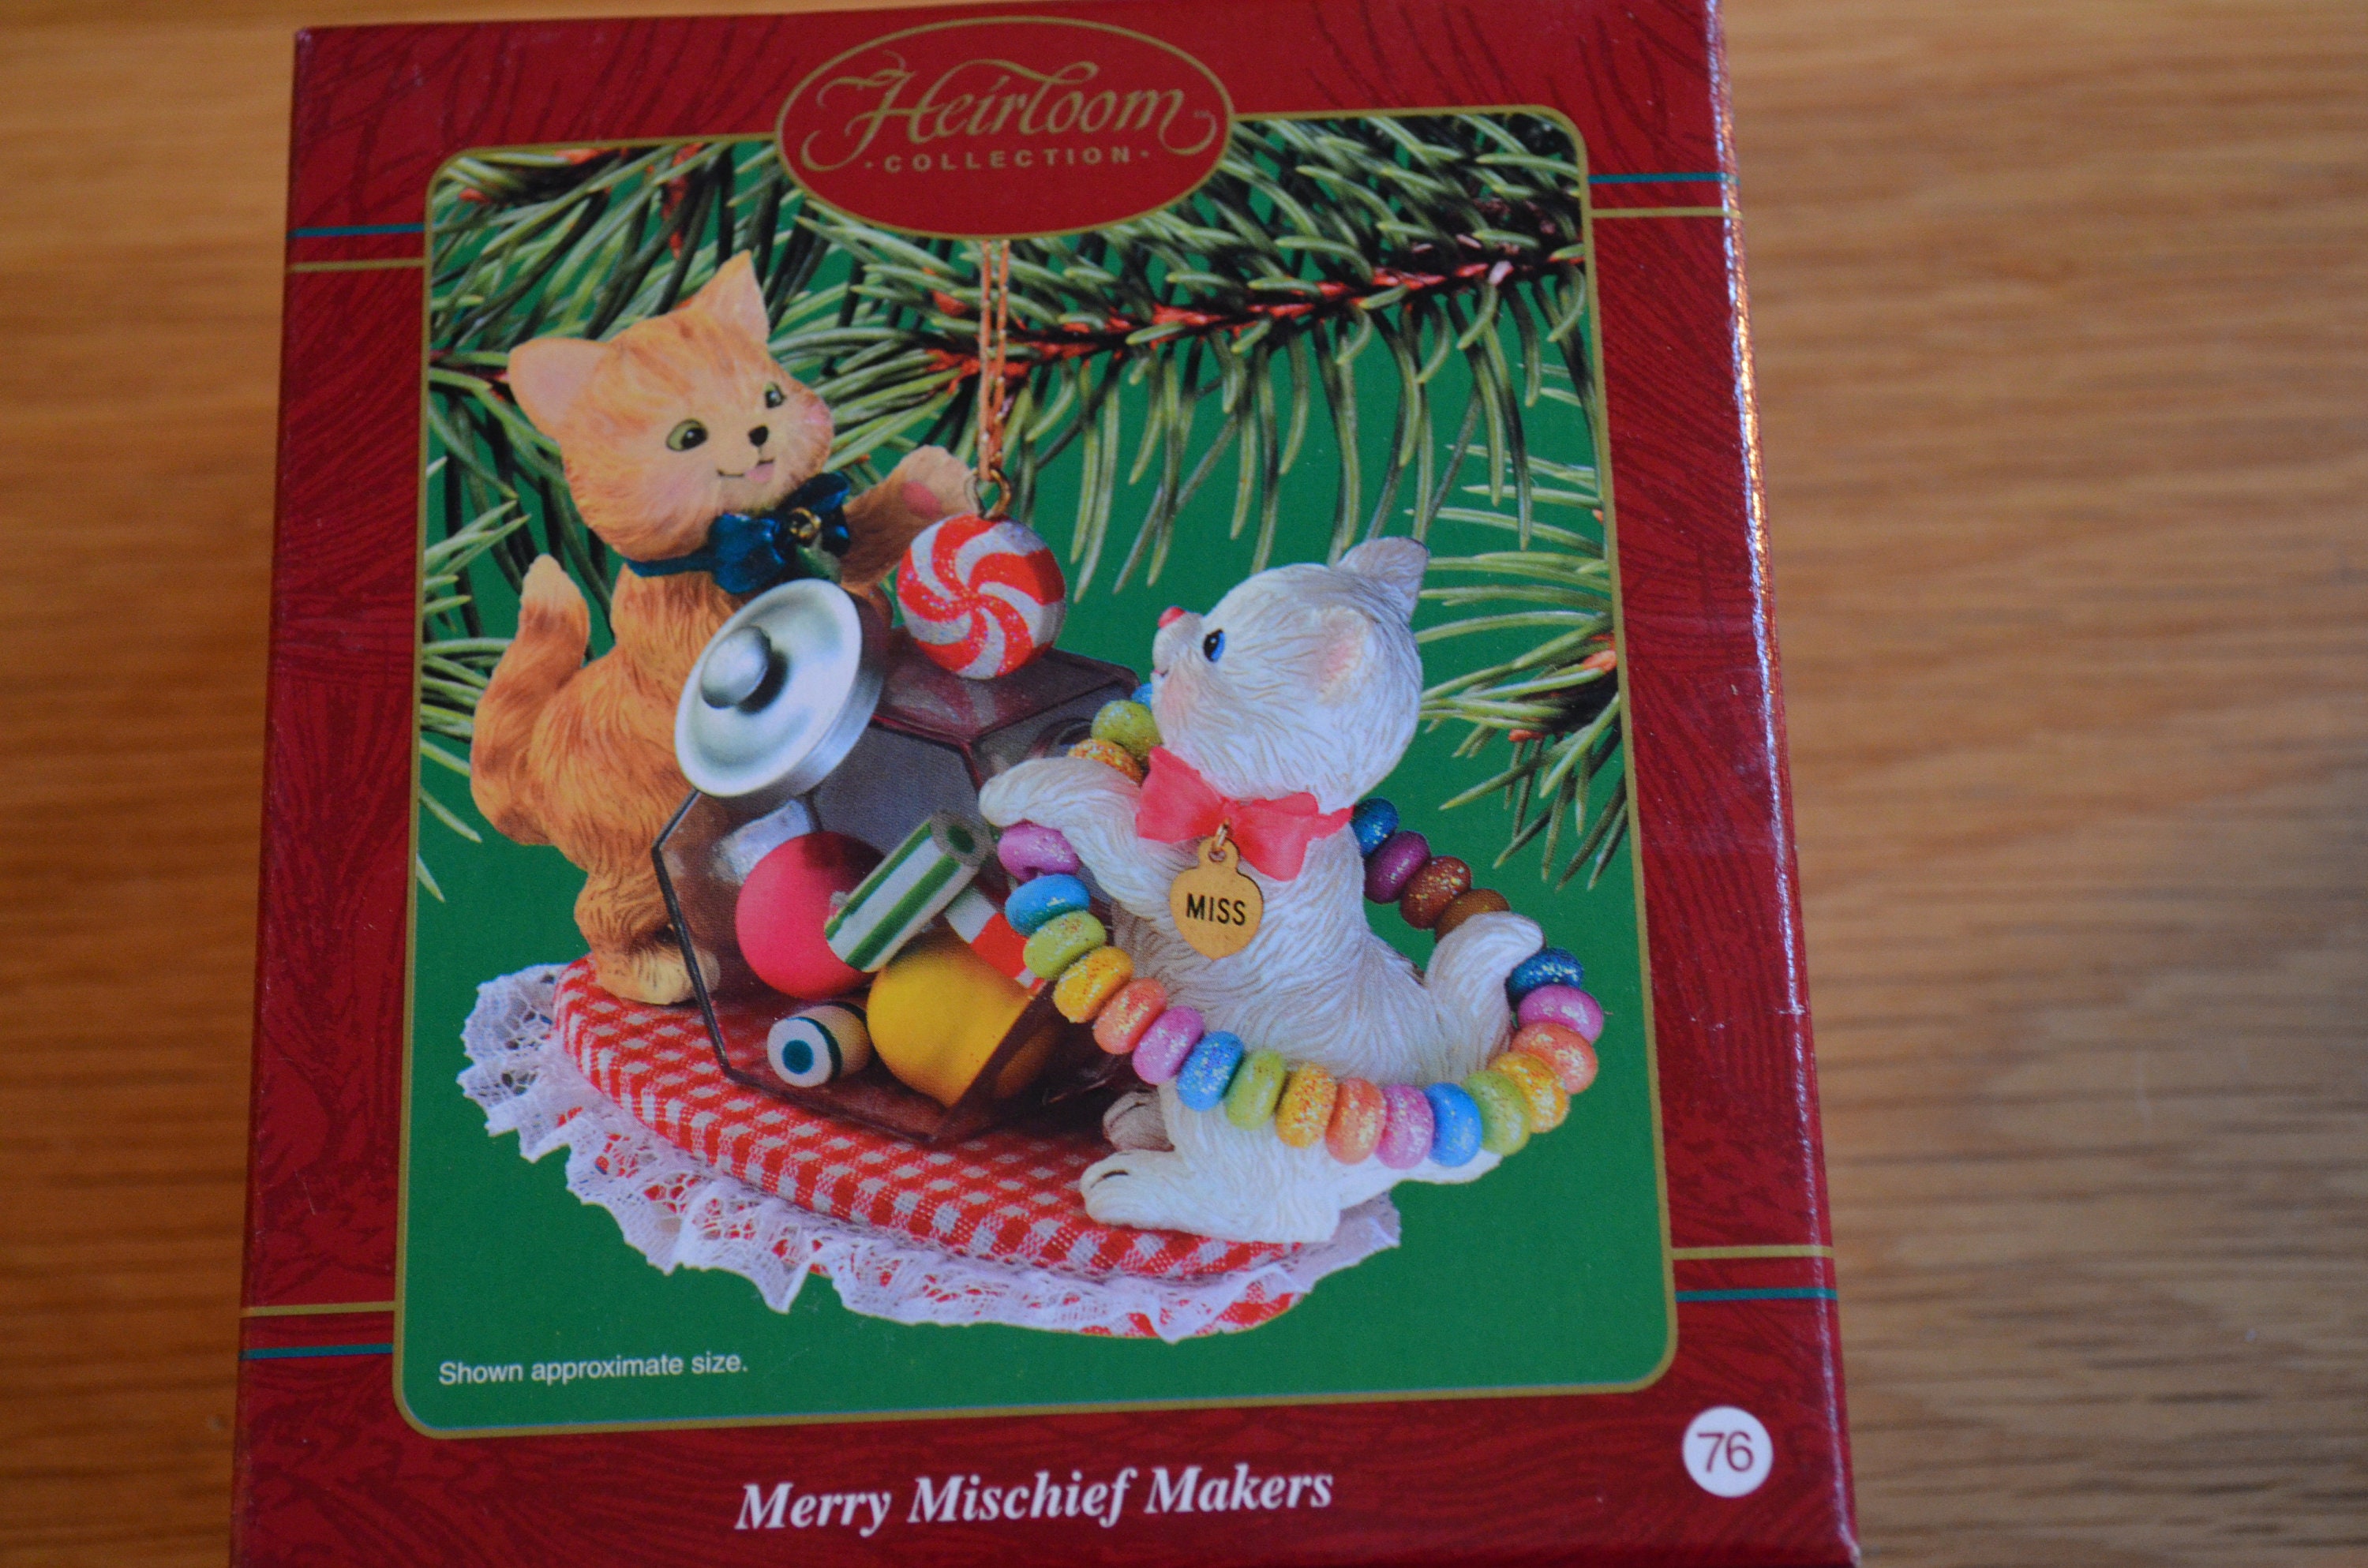 2000 Scholastic Entertainment, Carlton Cards, Heirloom Collection,  Clifford's TREE-mendous Ornament